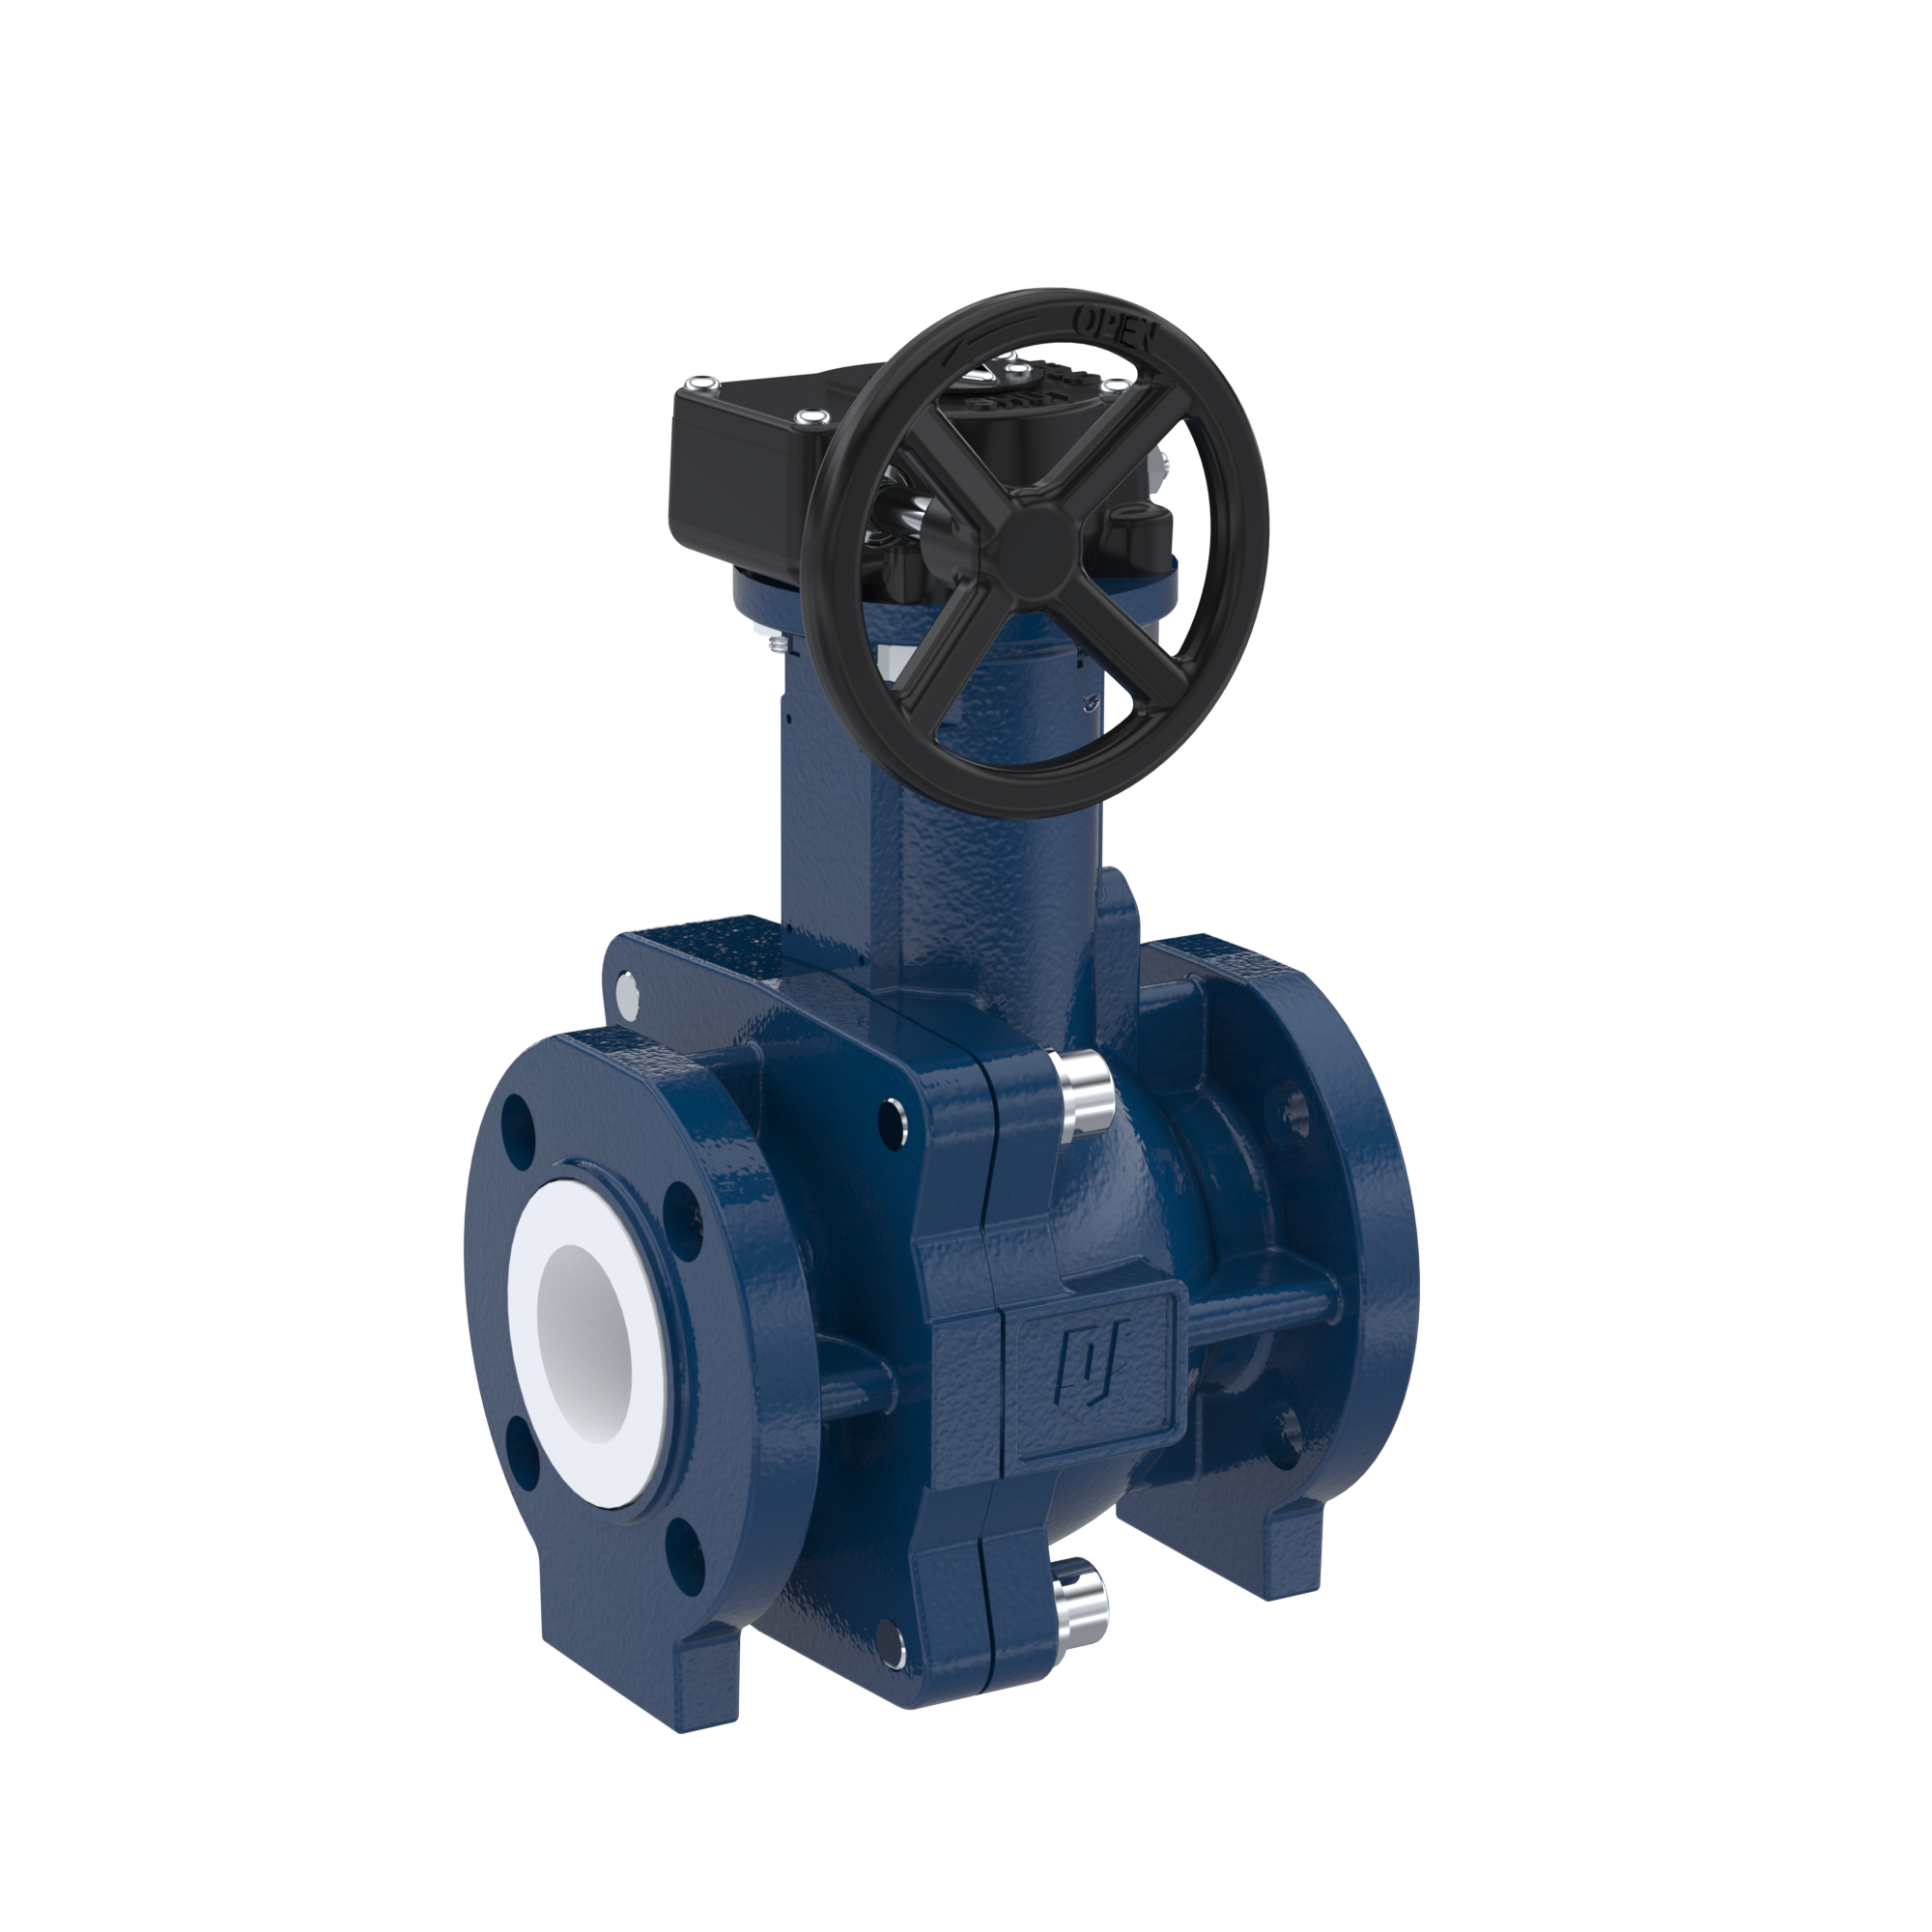 PFA-flange ball valve FK13 DN15 - 1/2" inch ANSI 150 made of spheroidal graphite cast iron with worm gear